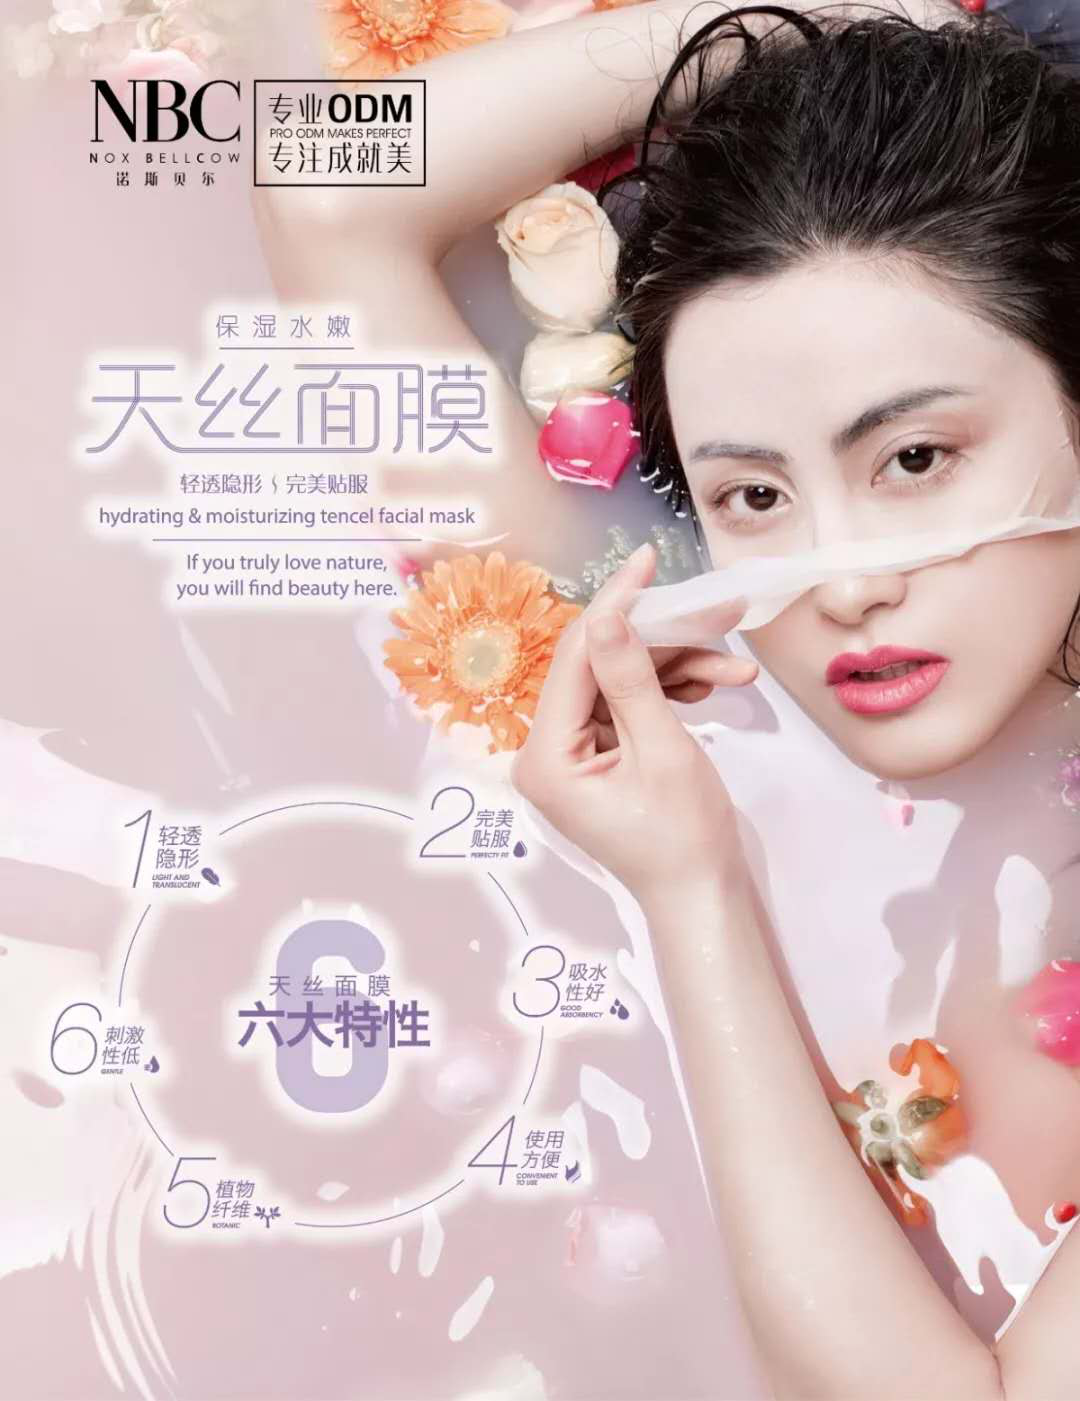 NOX BELLCOW-Determined To Promote New China-made Beauty Products, Nbc Is Helping Clients-8